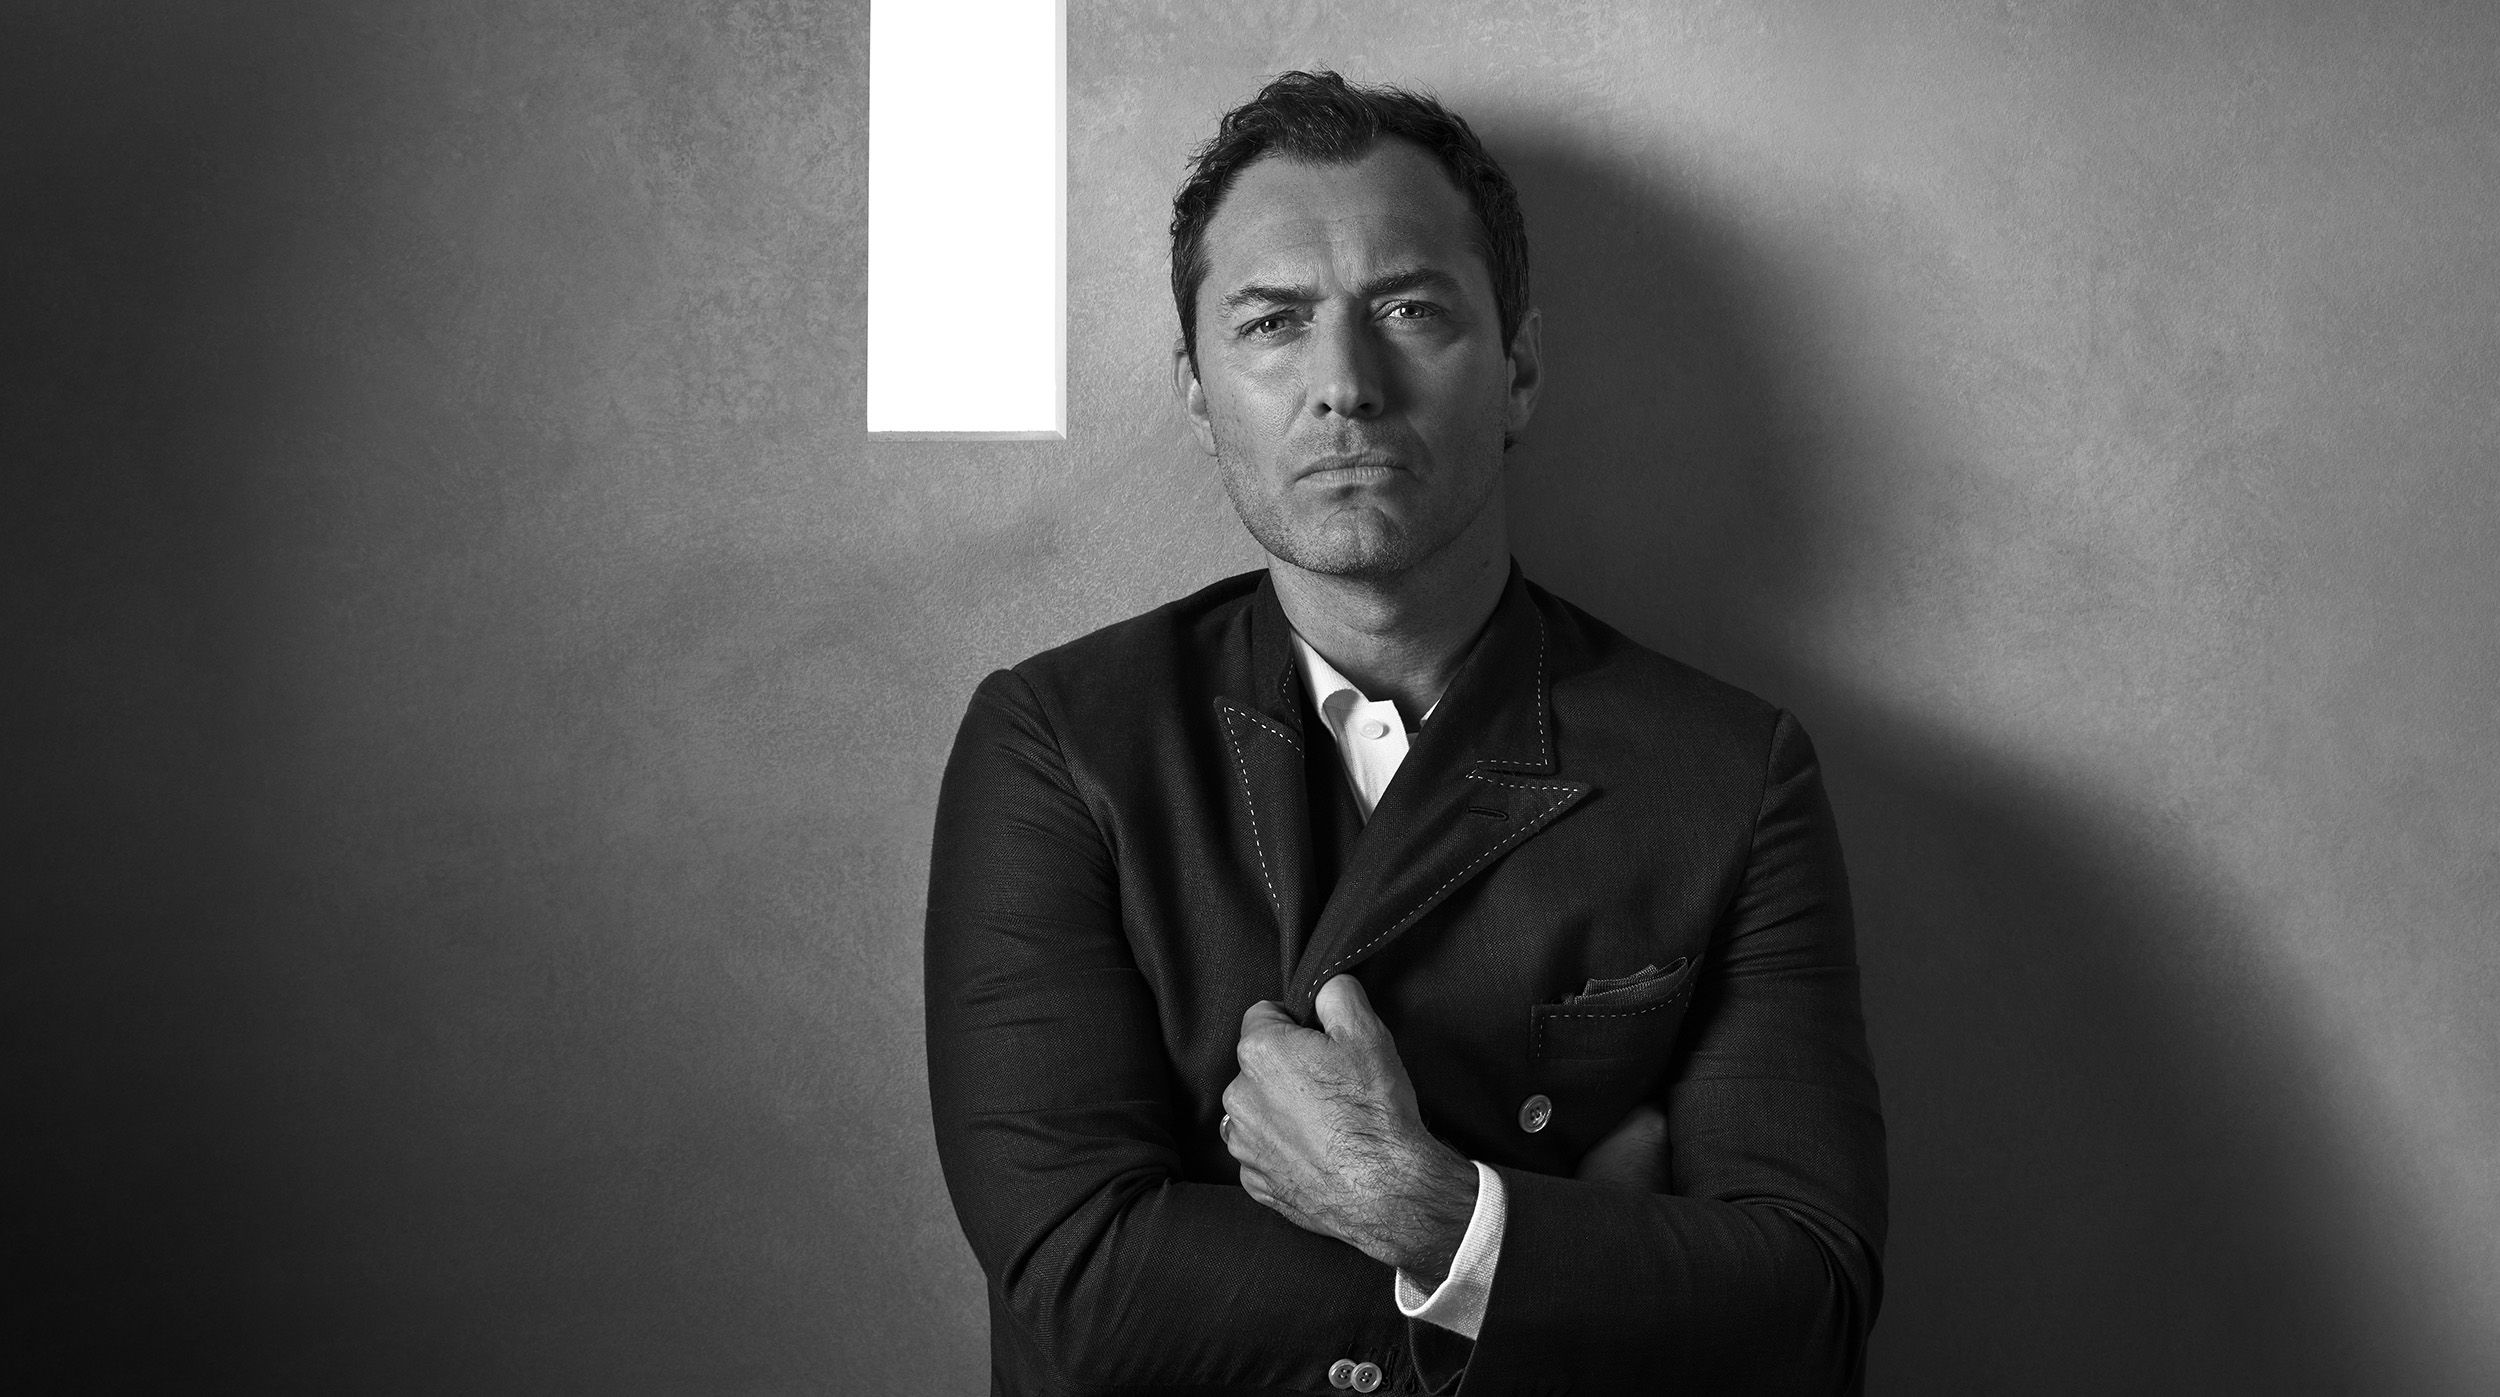 Jude Law Interview Interview on Fashion, His Brioni Campaign, The Talented  Mr. Ripley